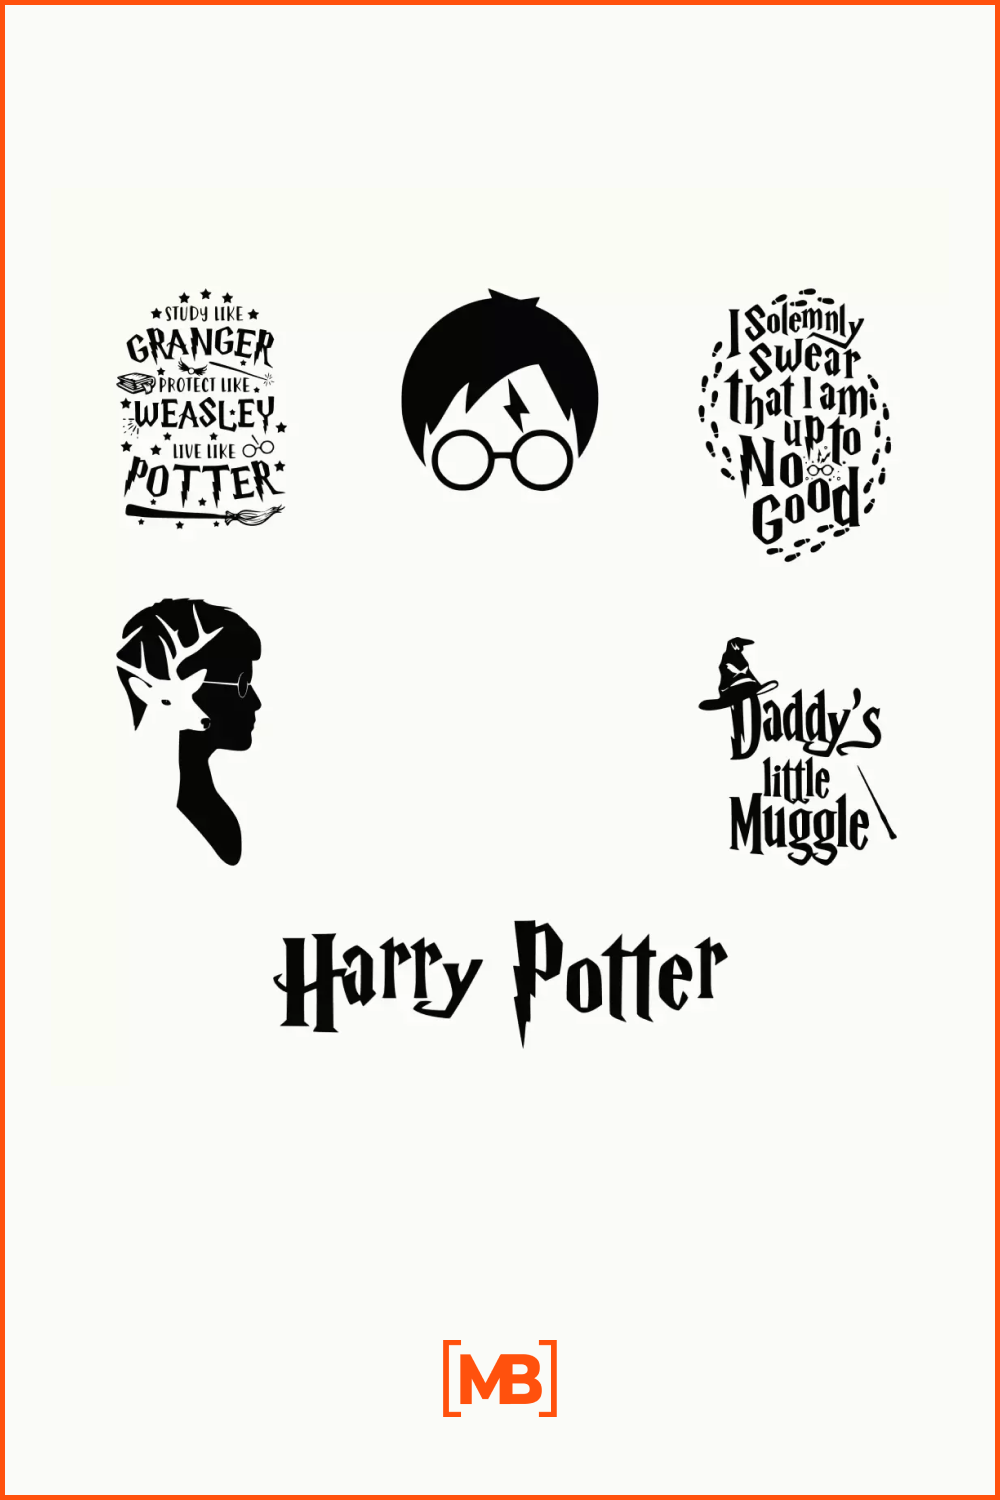 Harry potter silhouette and lettering.